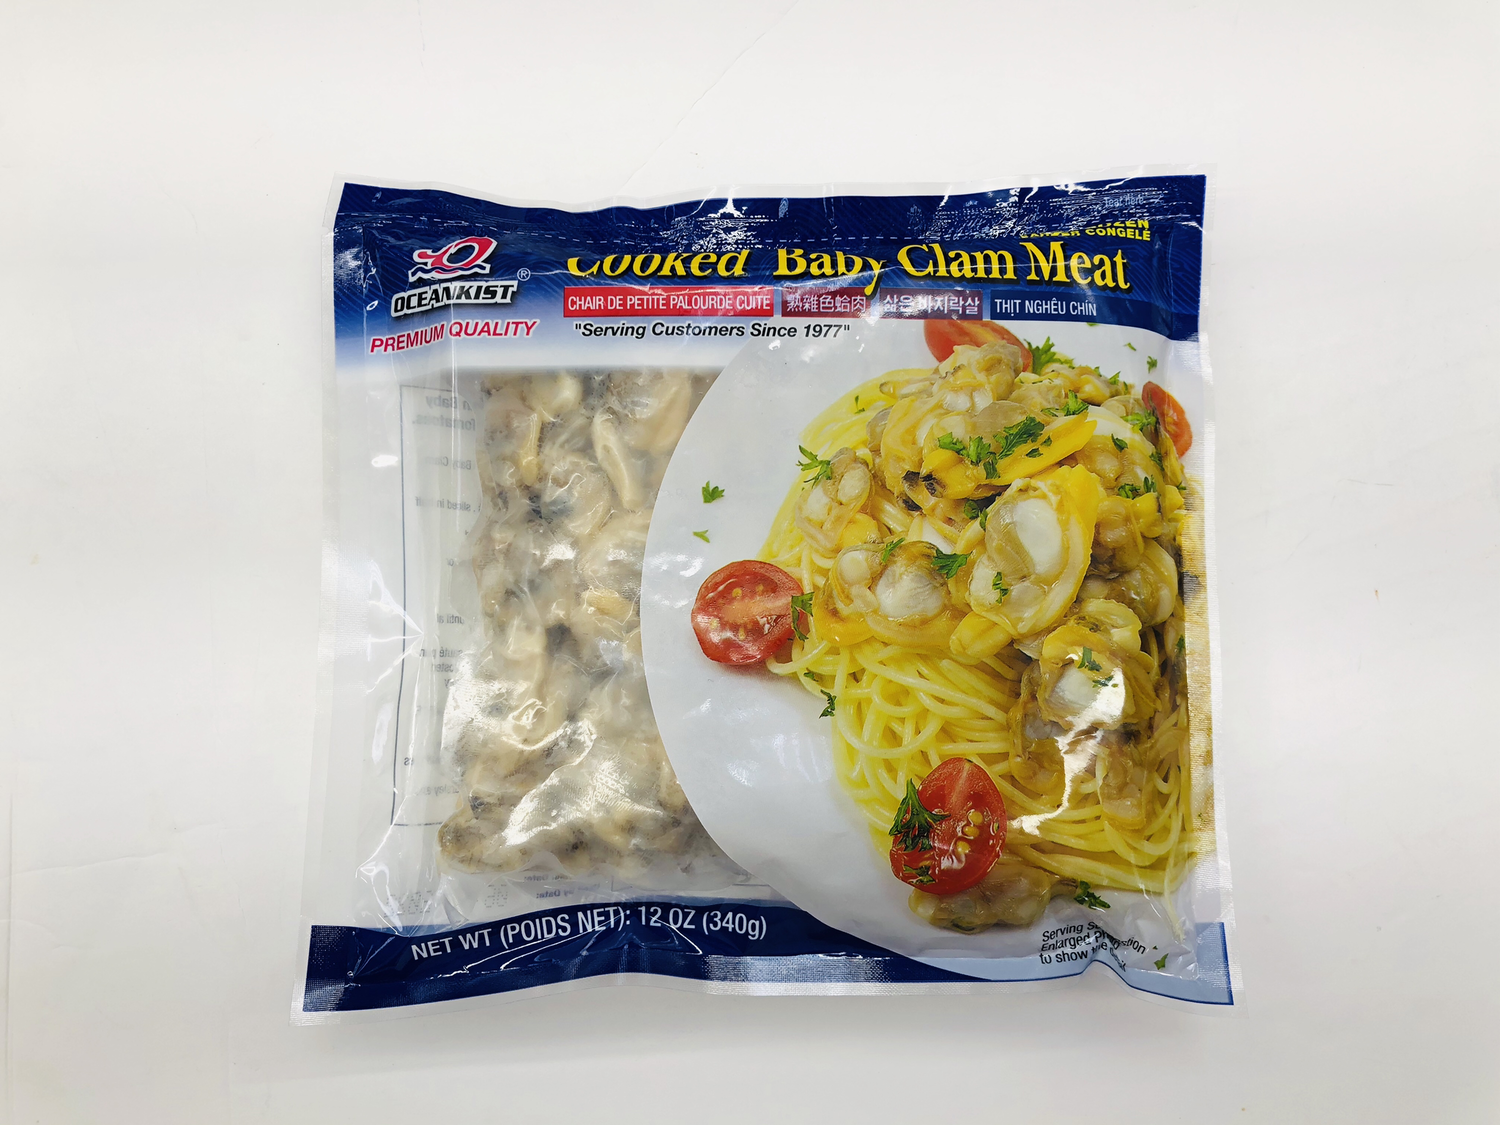 OCEANKIST 熟杂色蛤肉 Cooked Baby Clam Meat 12OZ(340g)